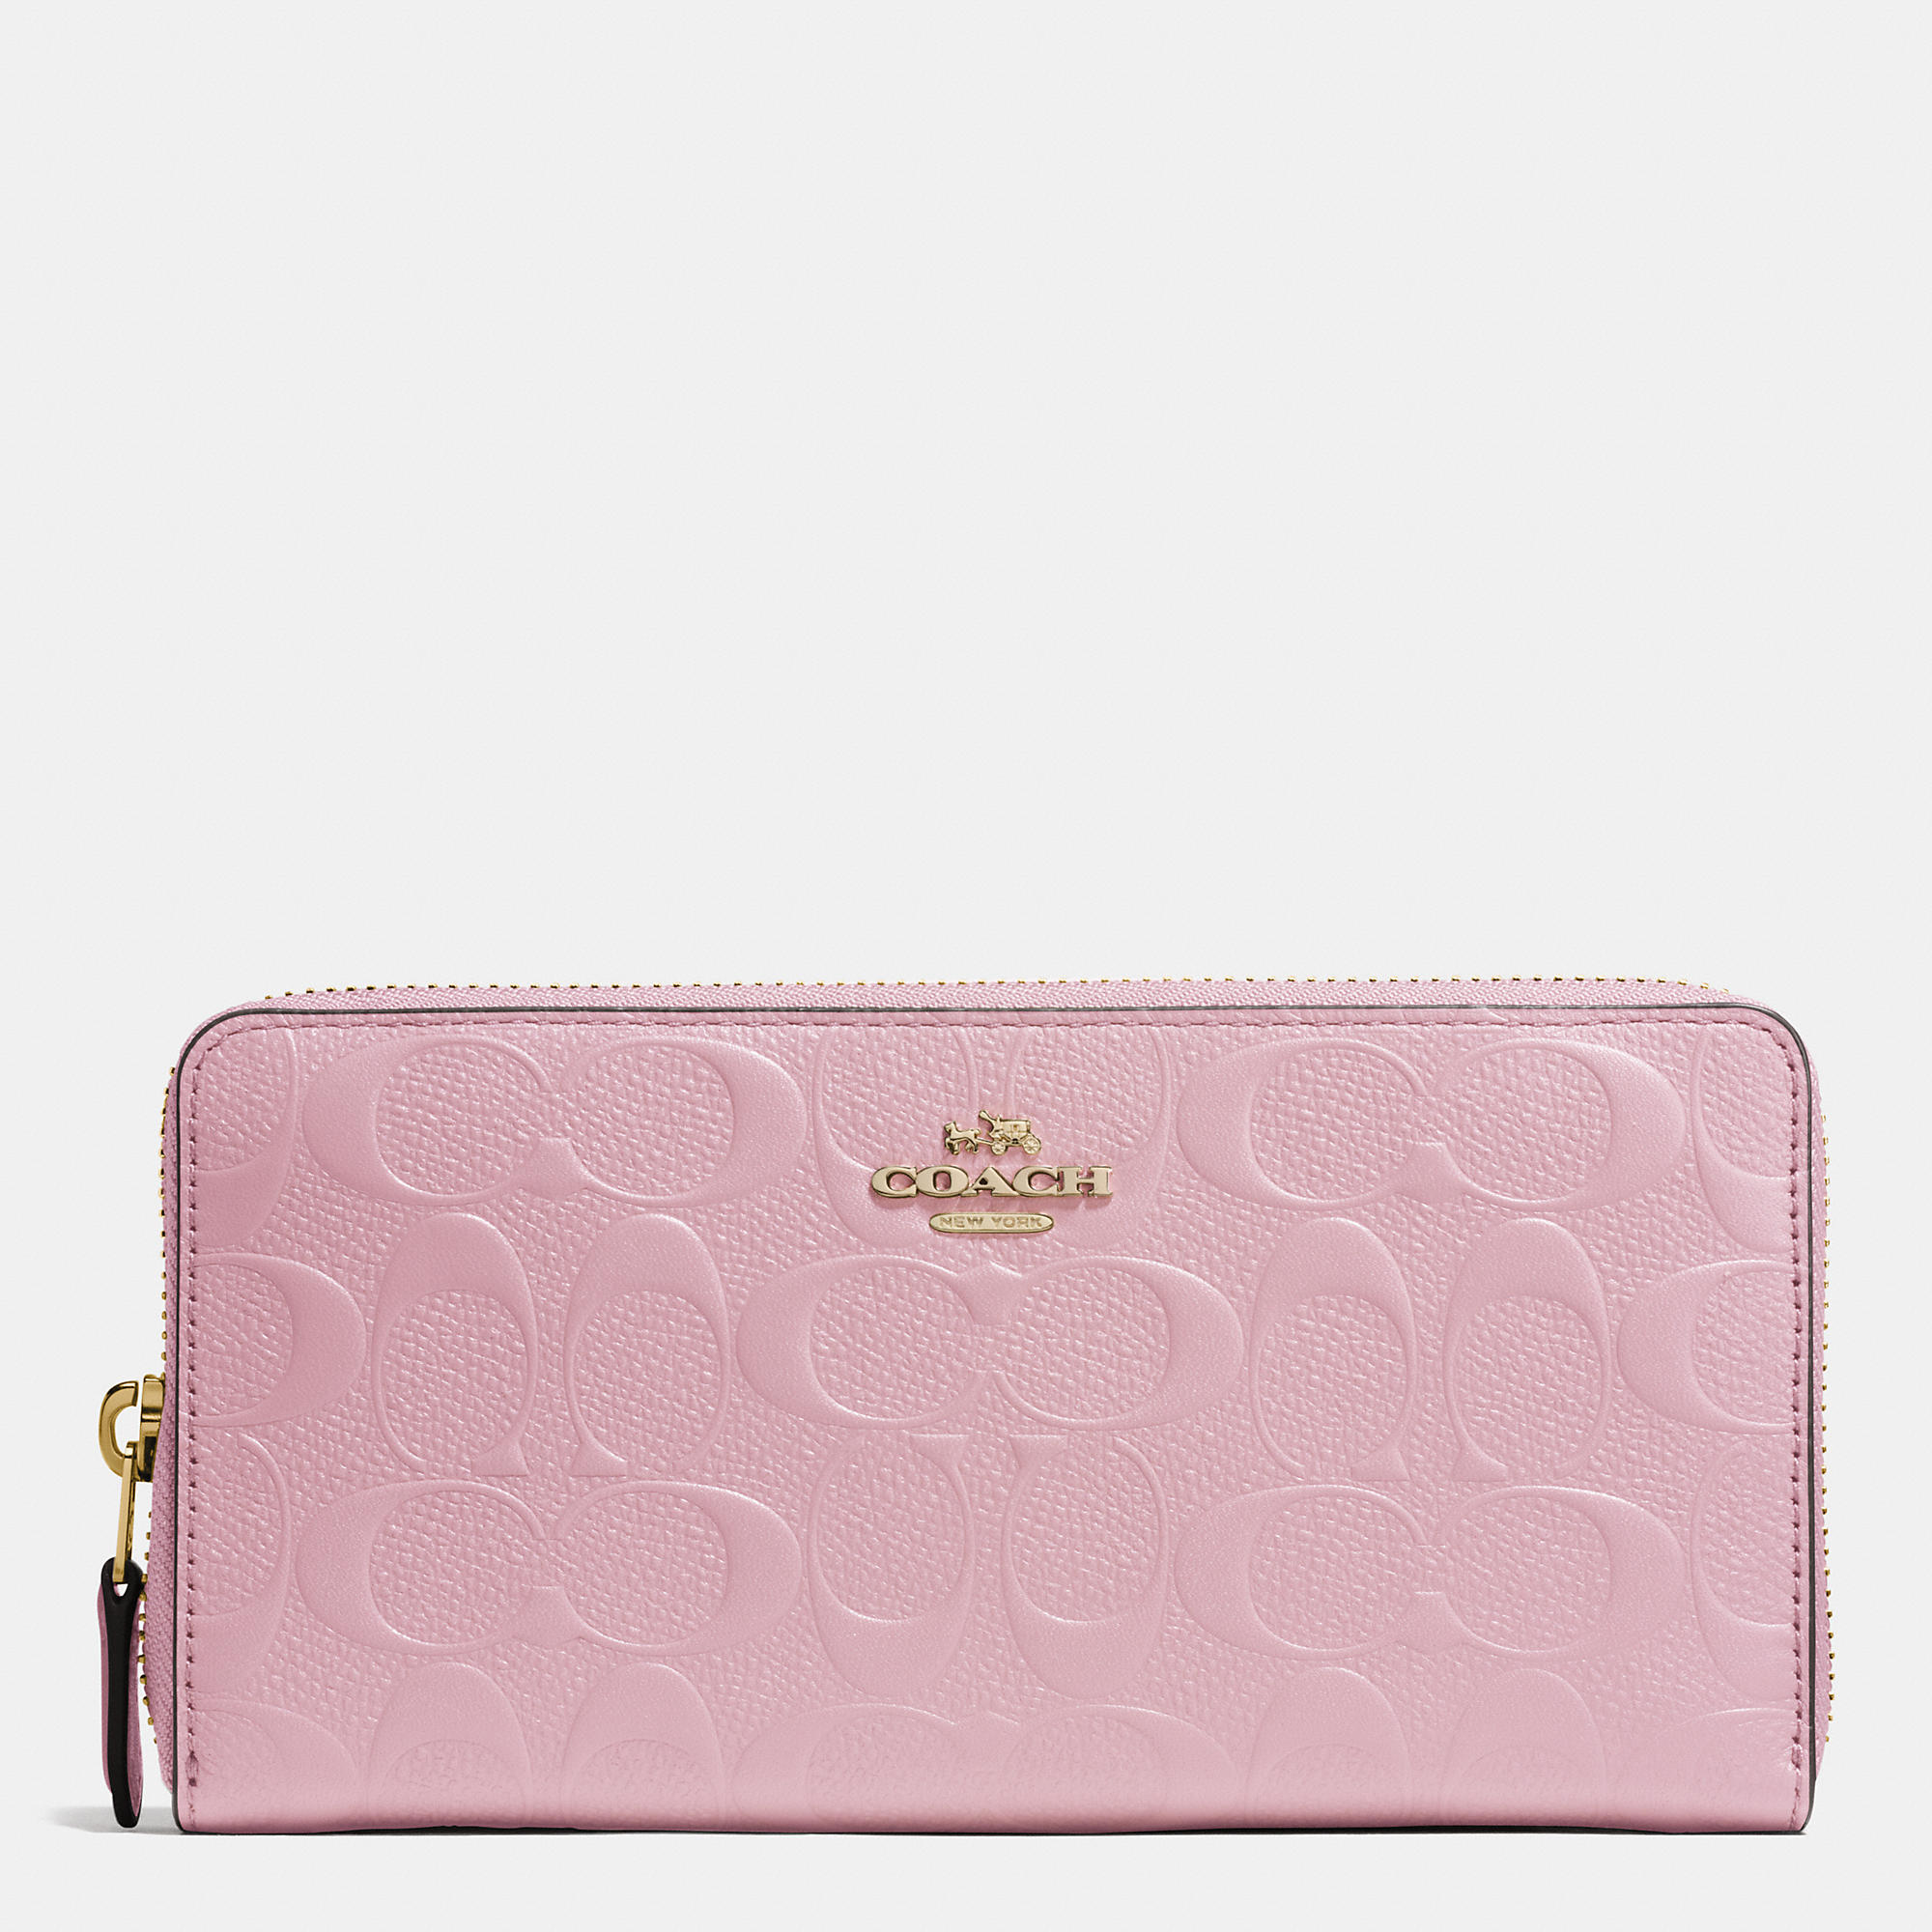 European Style Coach Accordion Zip Wallet In Signature Embossed Leather | Coach Outlet Canada